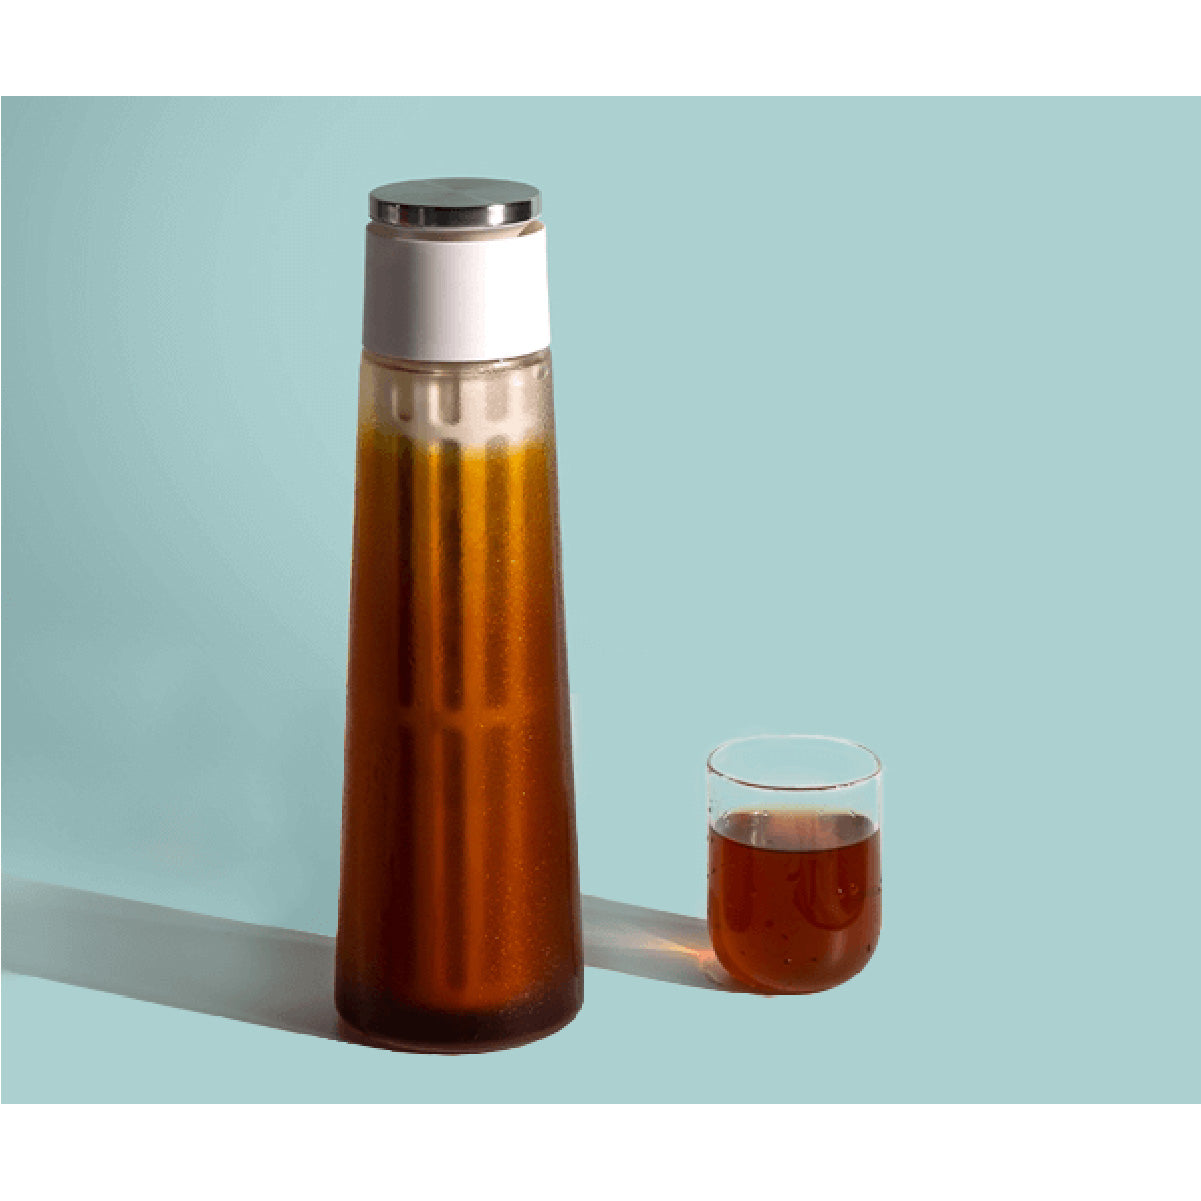 TIMEMORE Icicle Cold Brewer – Someware